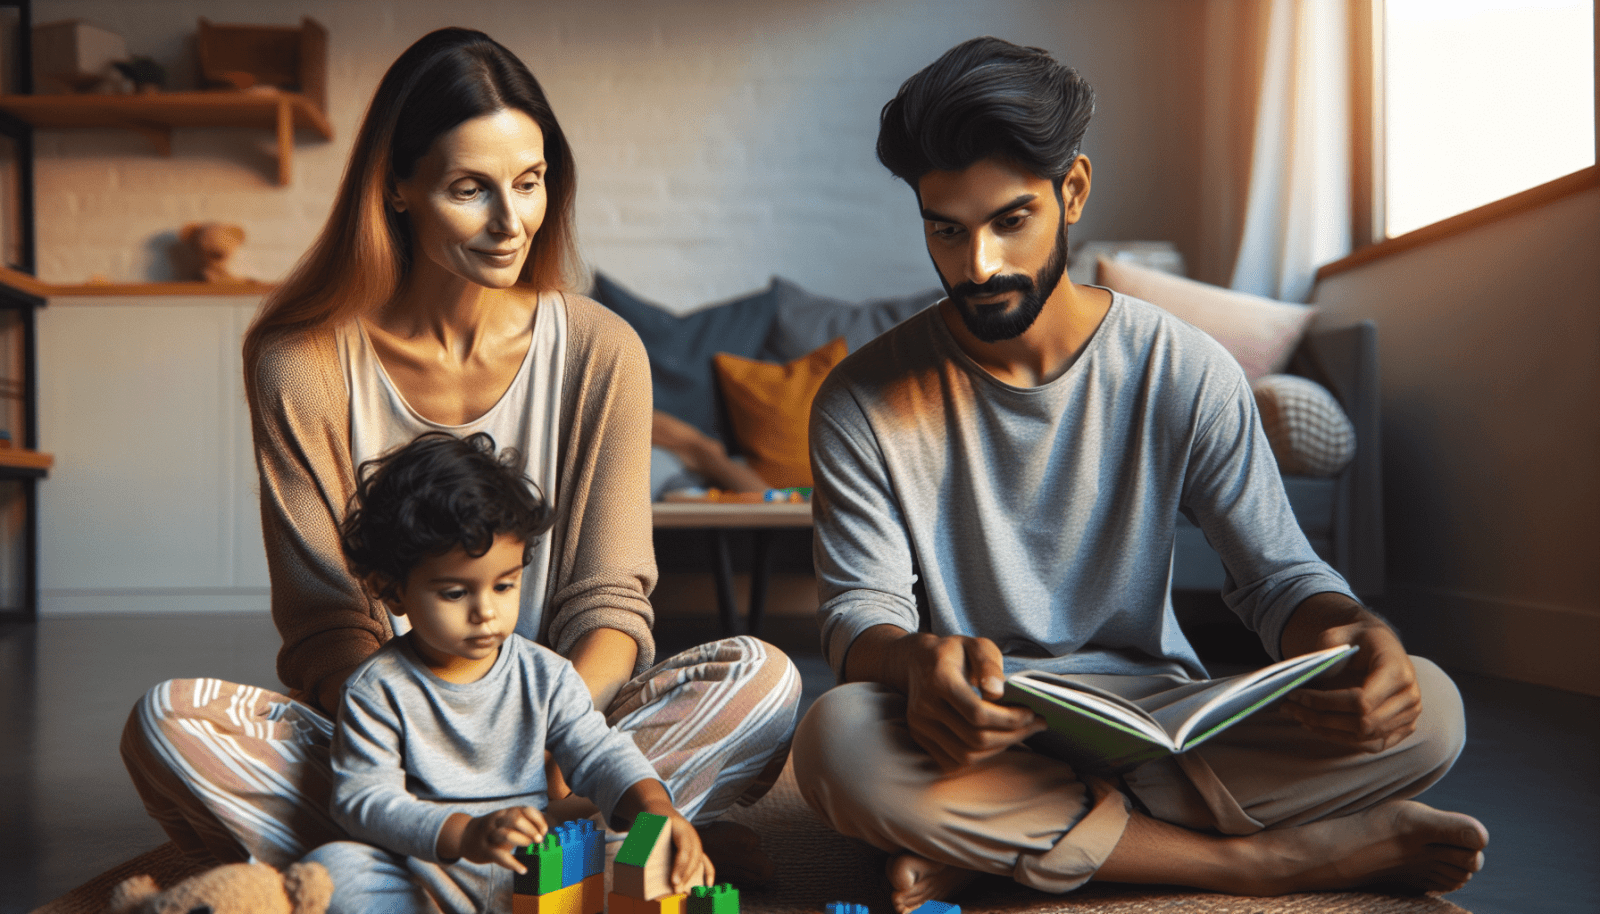 A young family spending time together at home, with a woman watching a toddler play with blocks and a man reading a book.